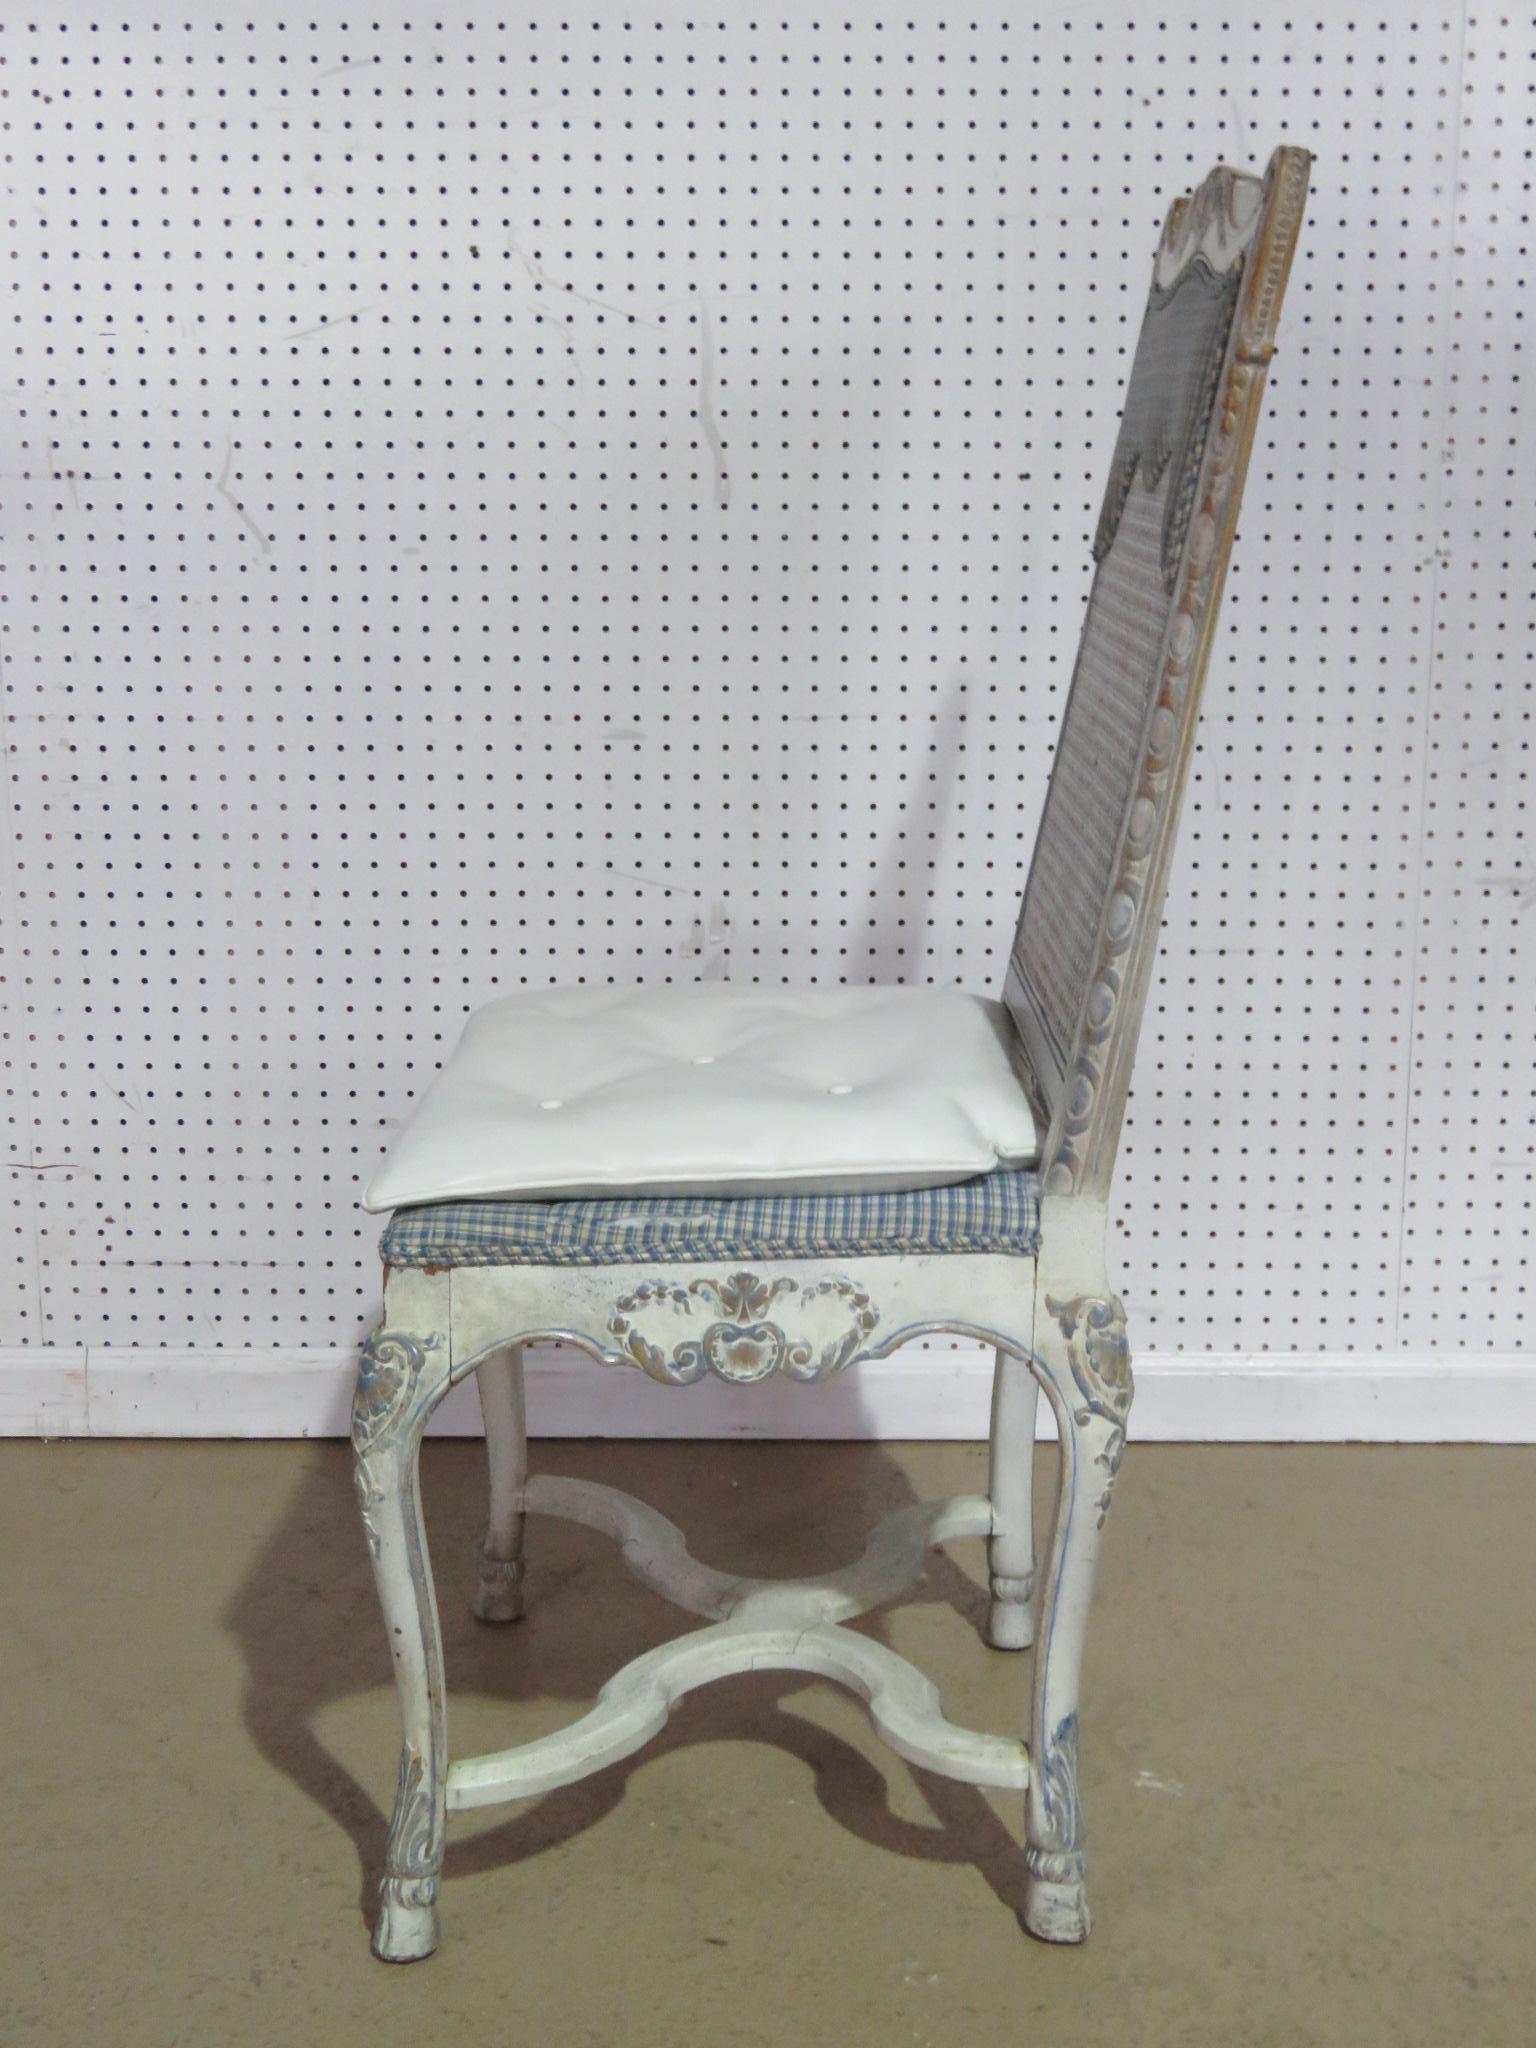 Swedish Rococo style distressed painted desk chair with a caned back.